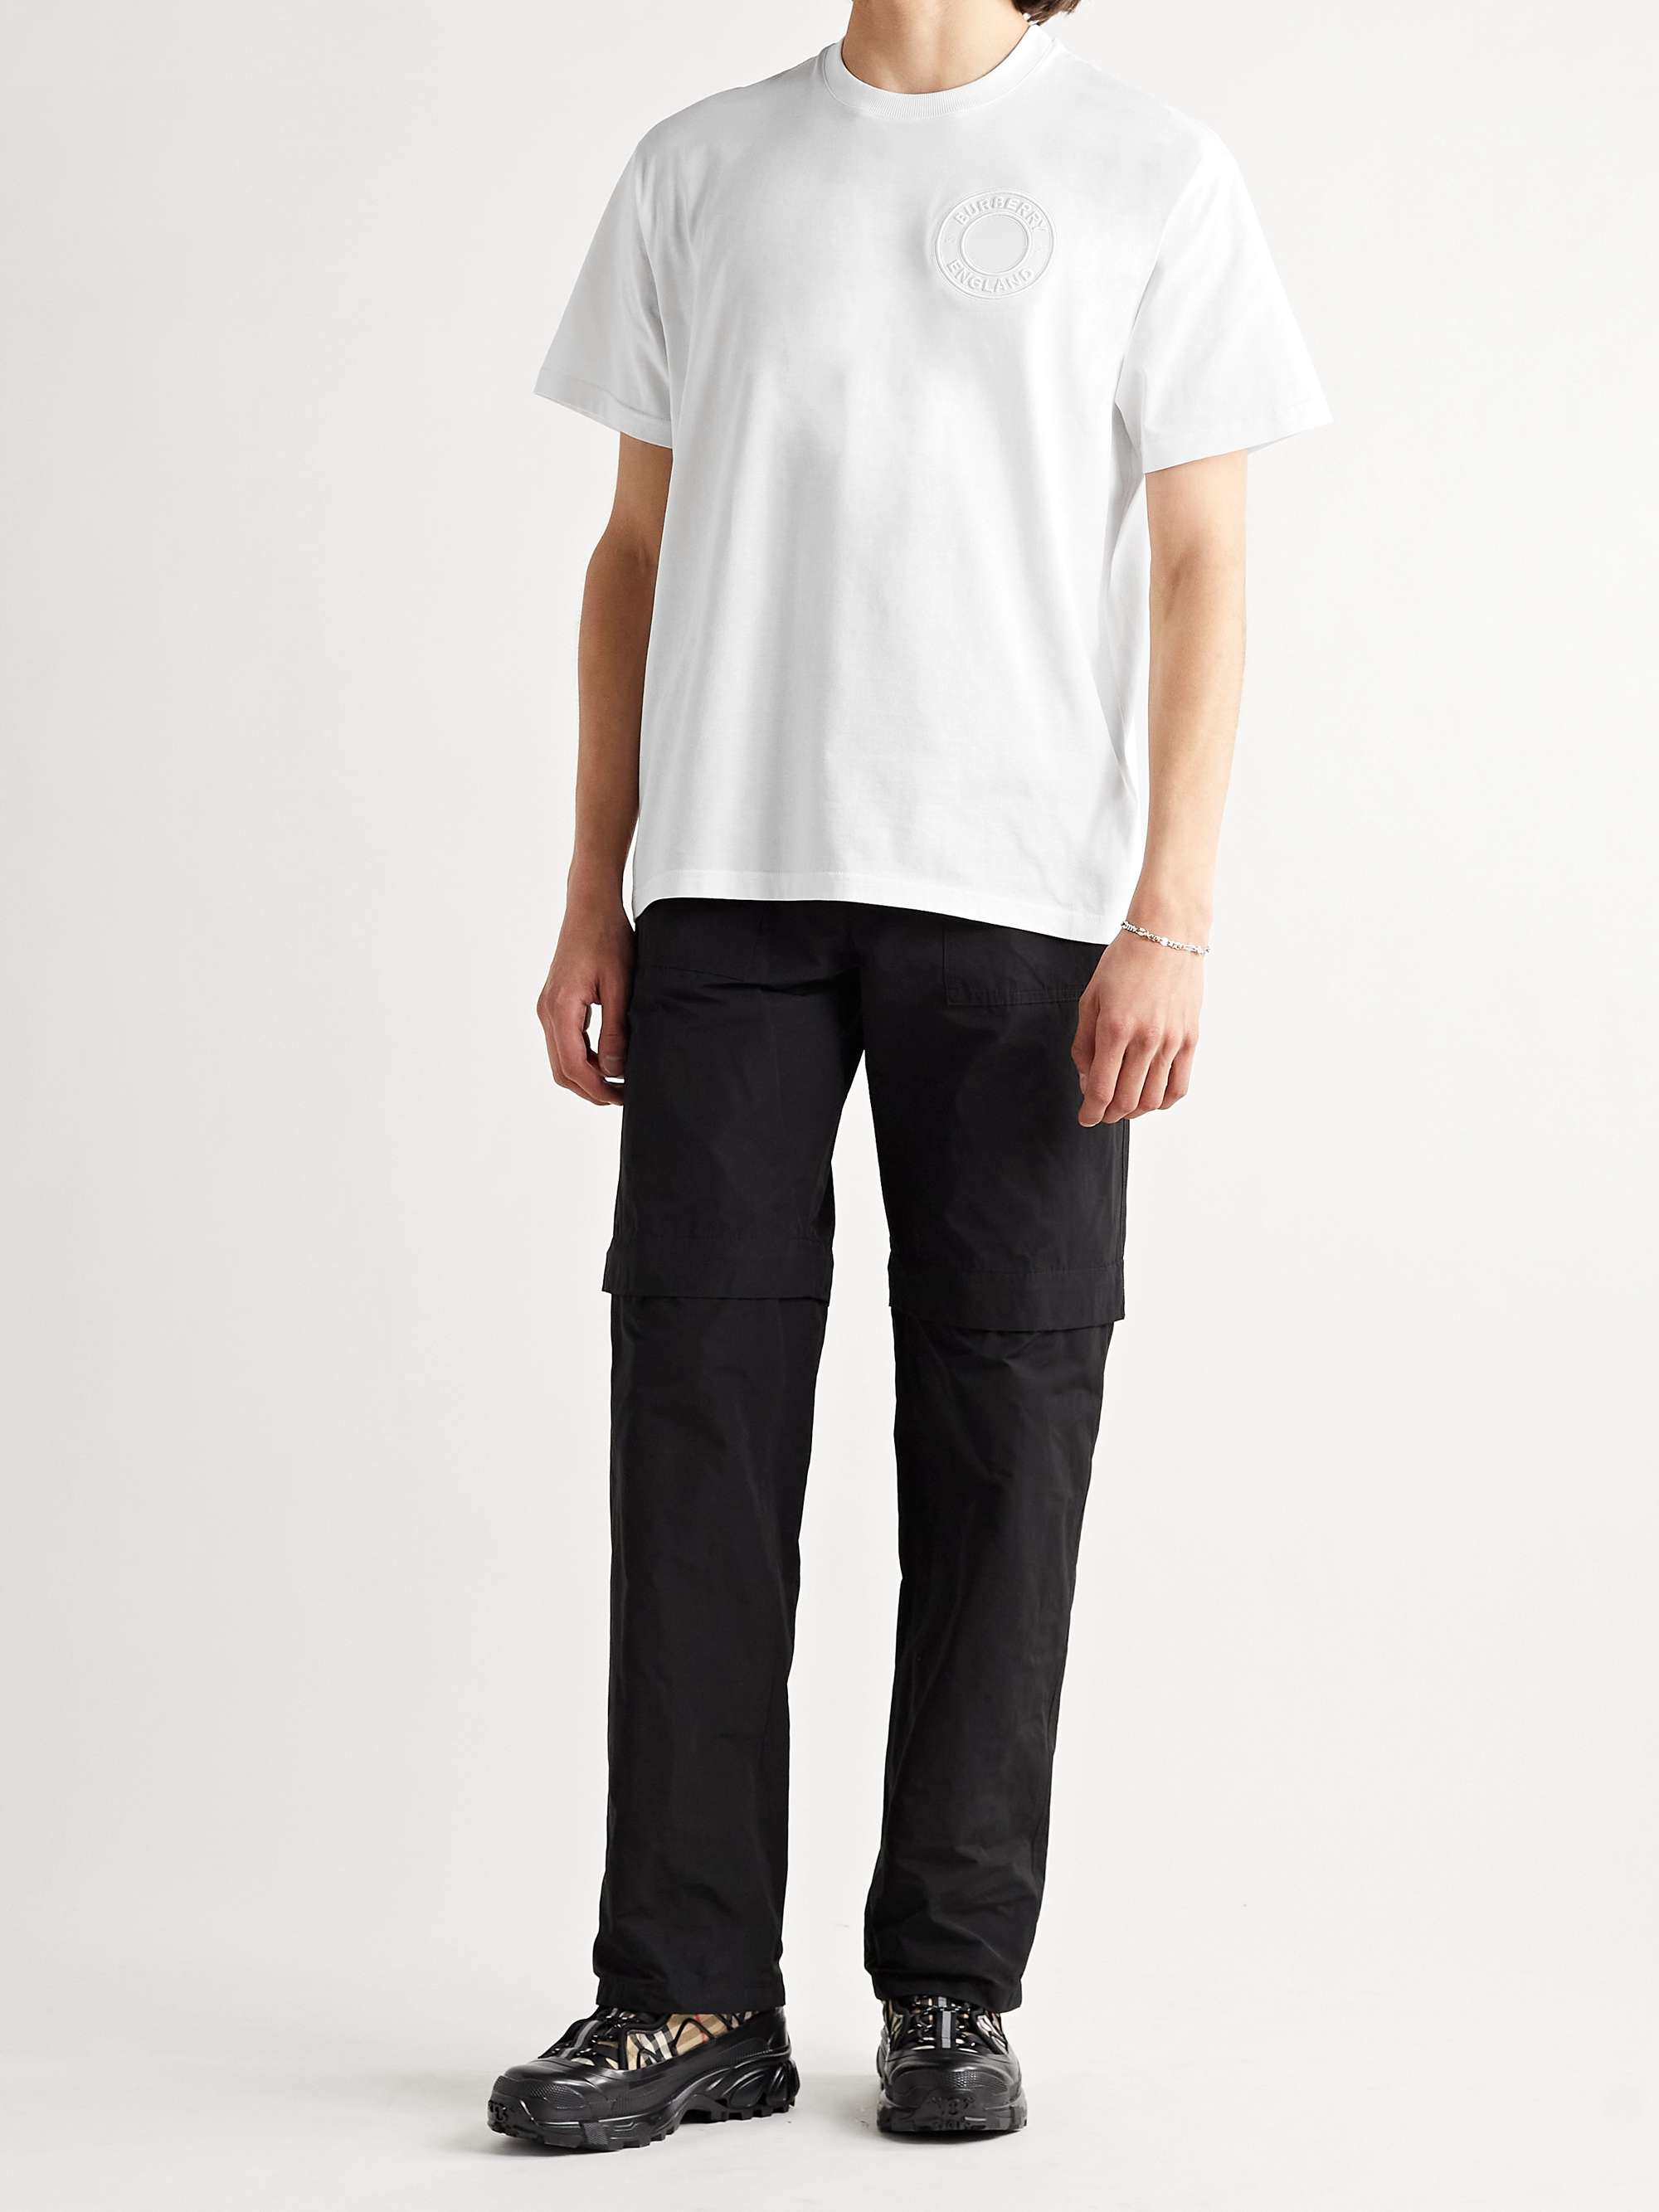 BURBERRY Logo-Embroidered Cotton-Jersey T-Shirt | MR PORTER